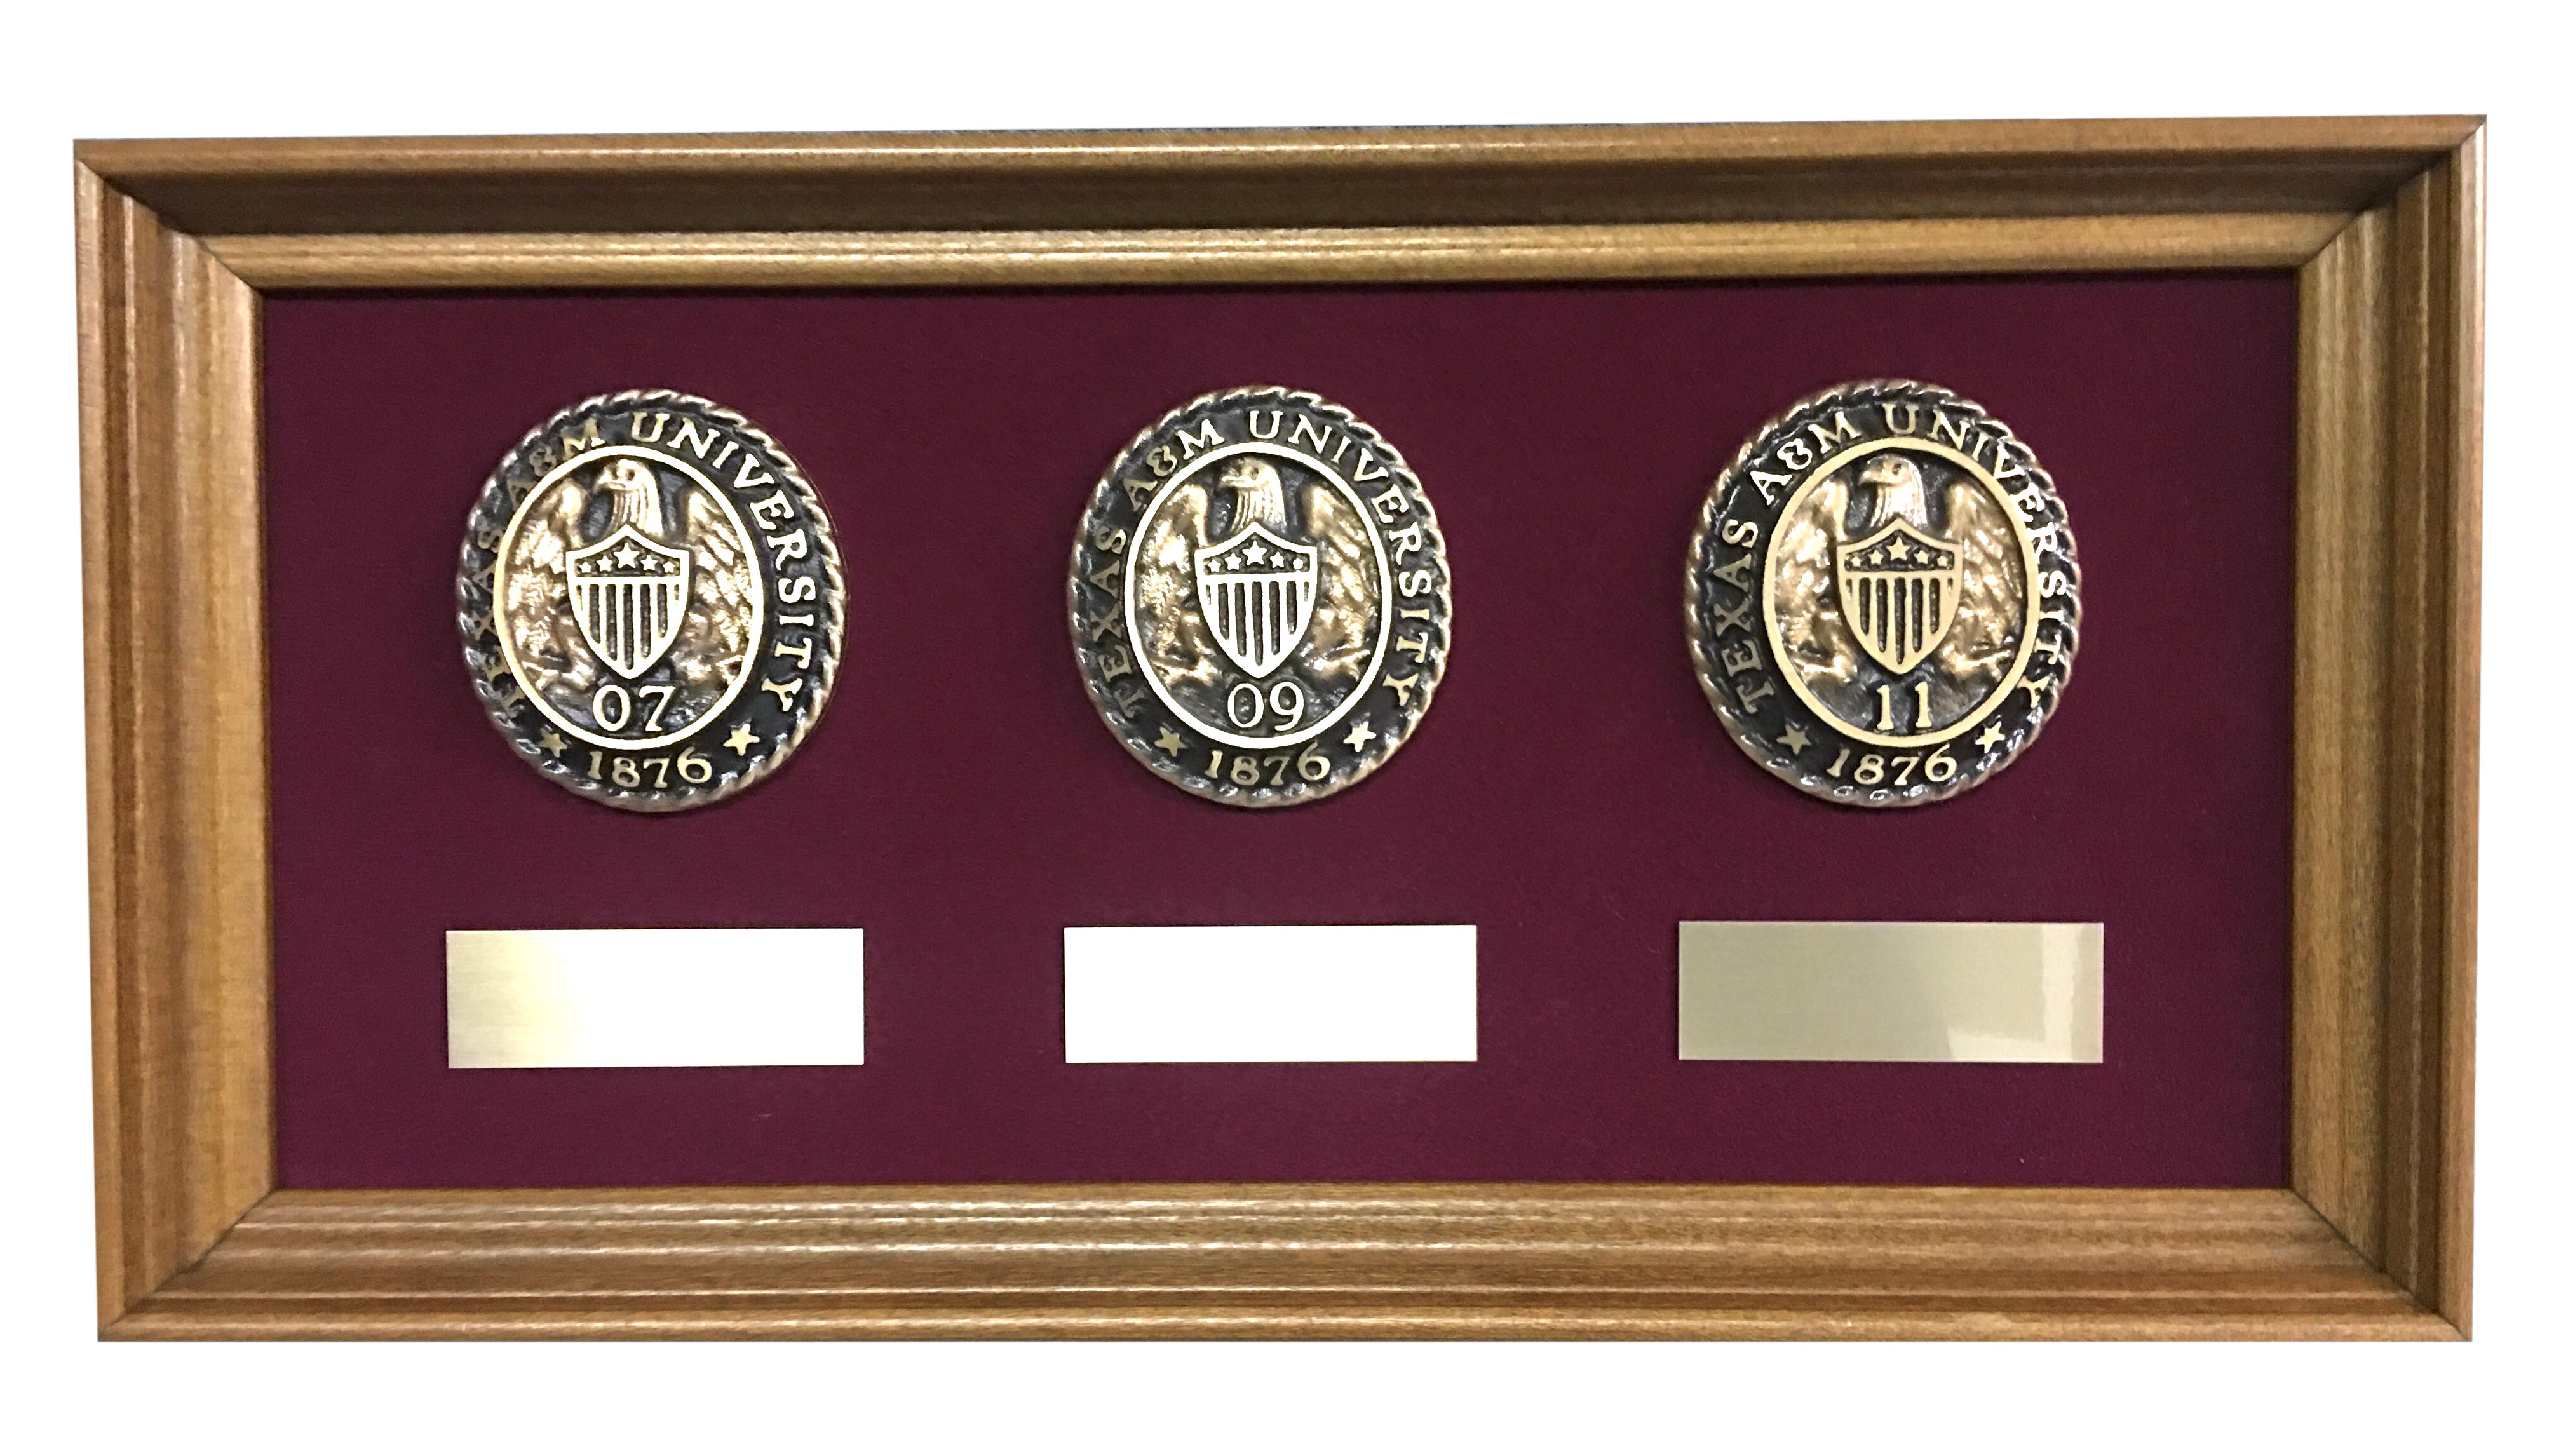 Aggie Ring Crest Triple Plaque with Name Plates